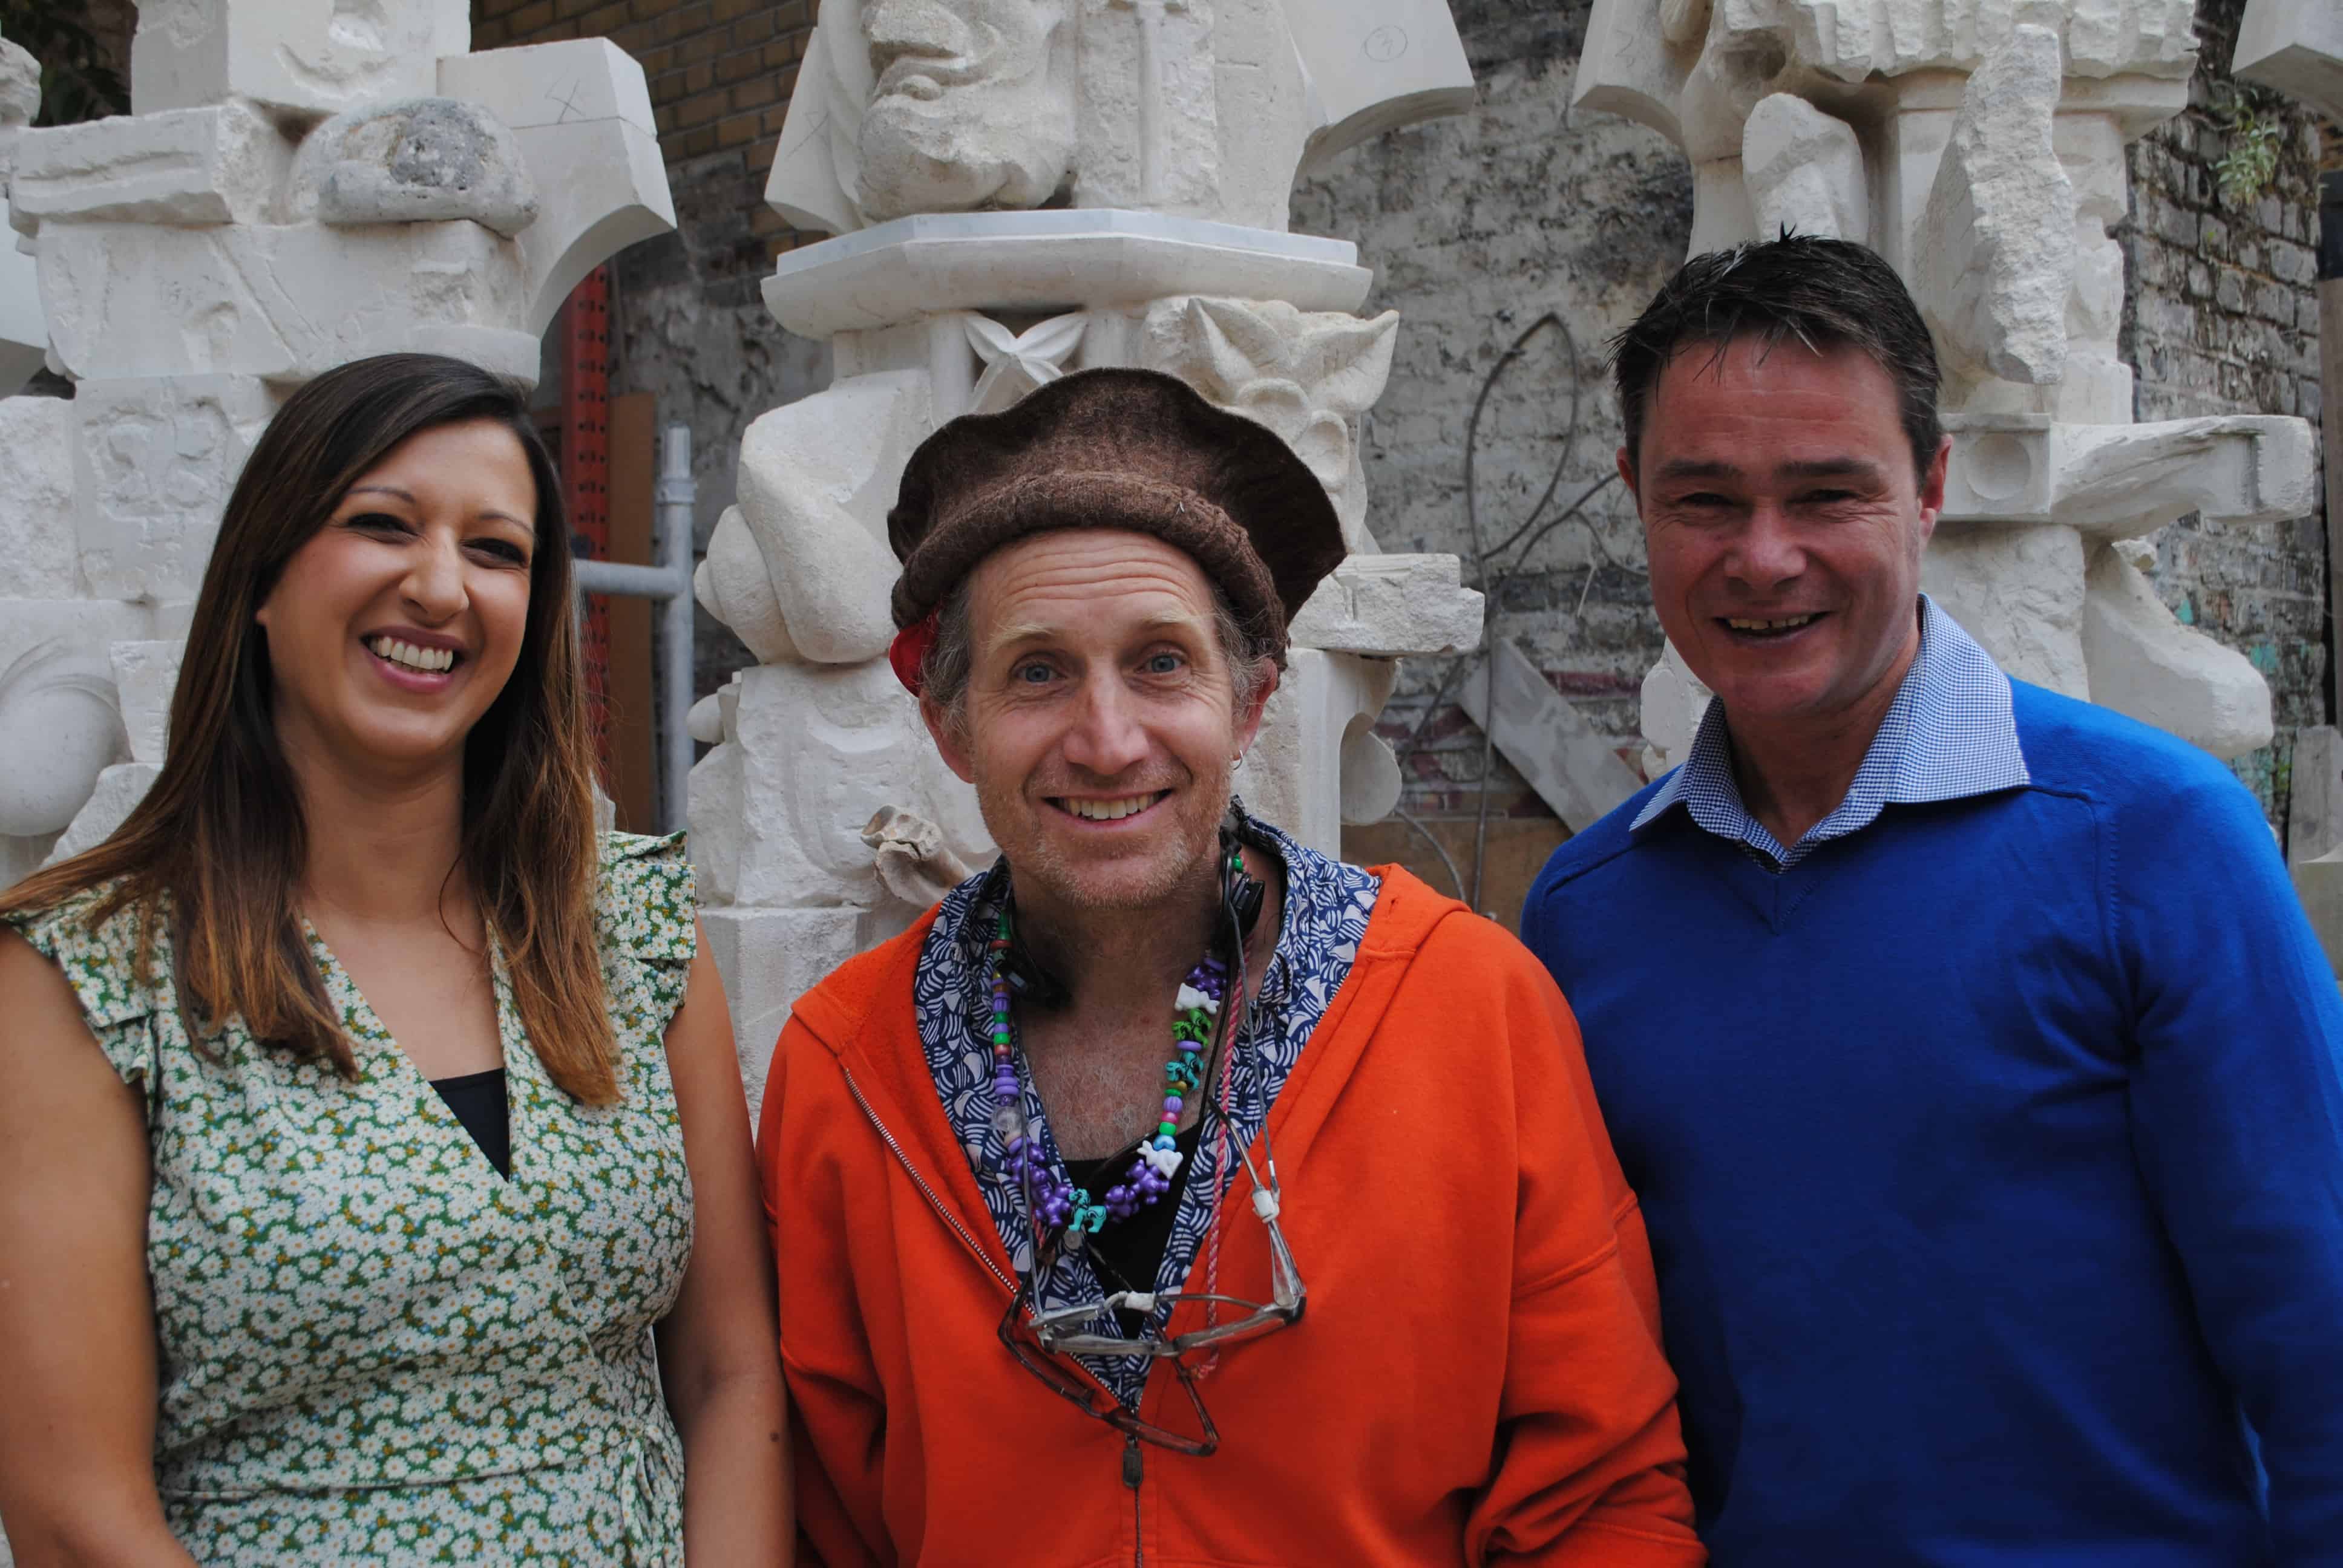 Artist Austin Emery pictured with Cllrs Damian O'Brien and Cllr Rebecca Lury